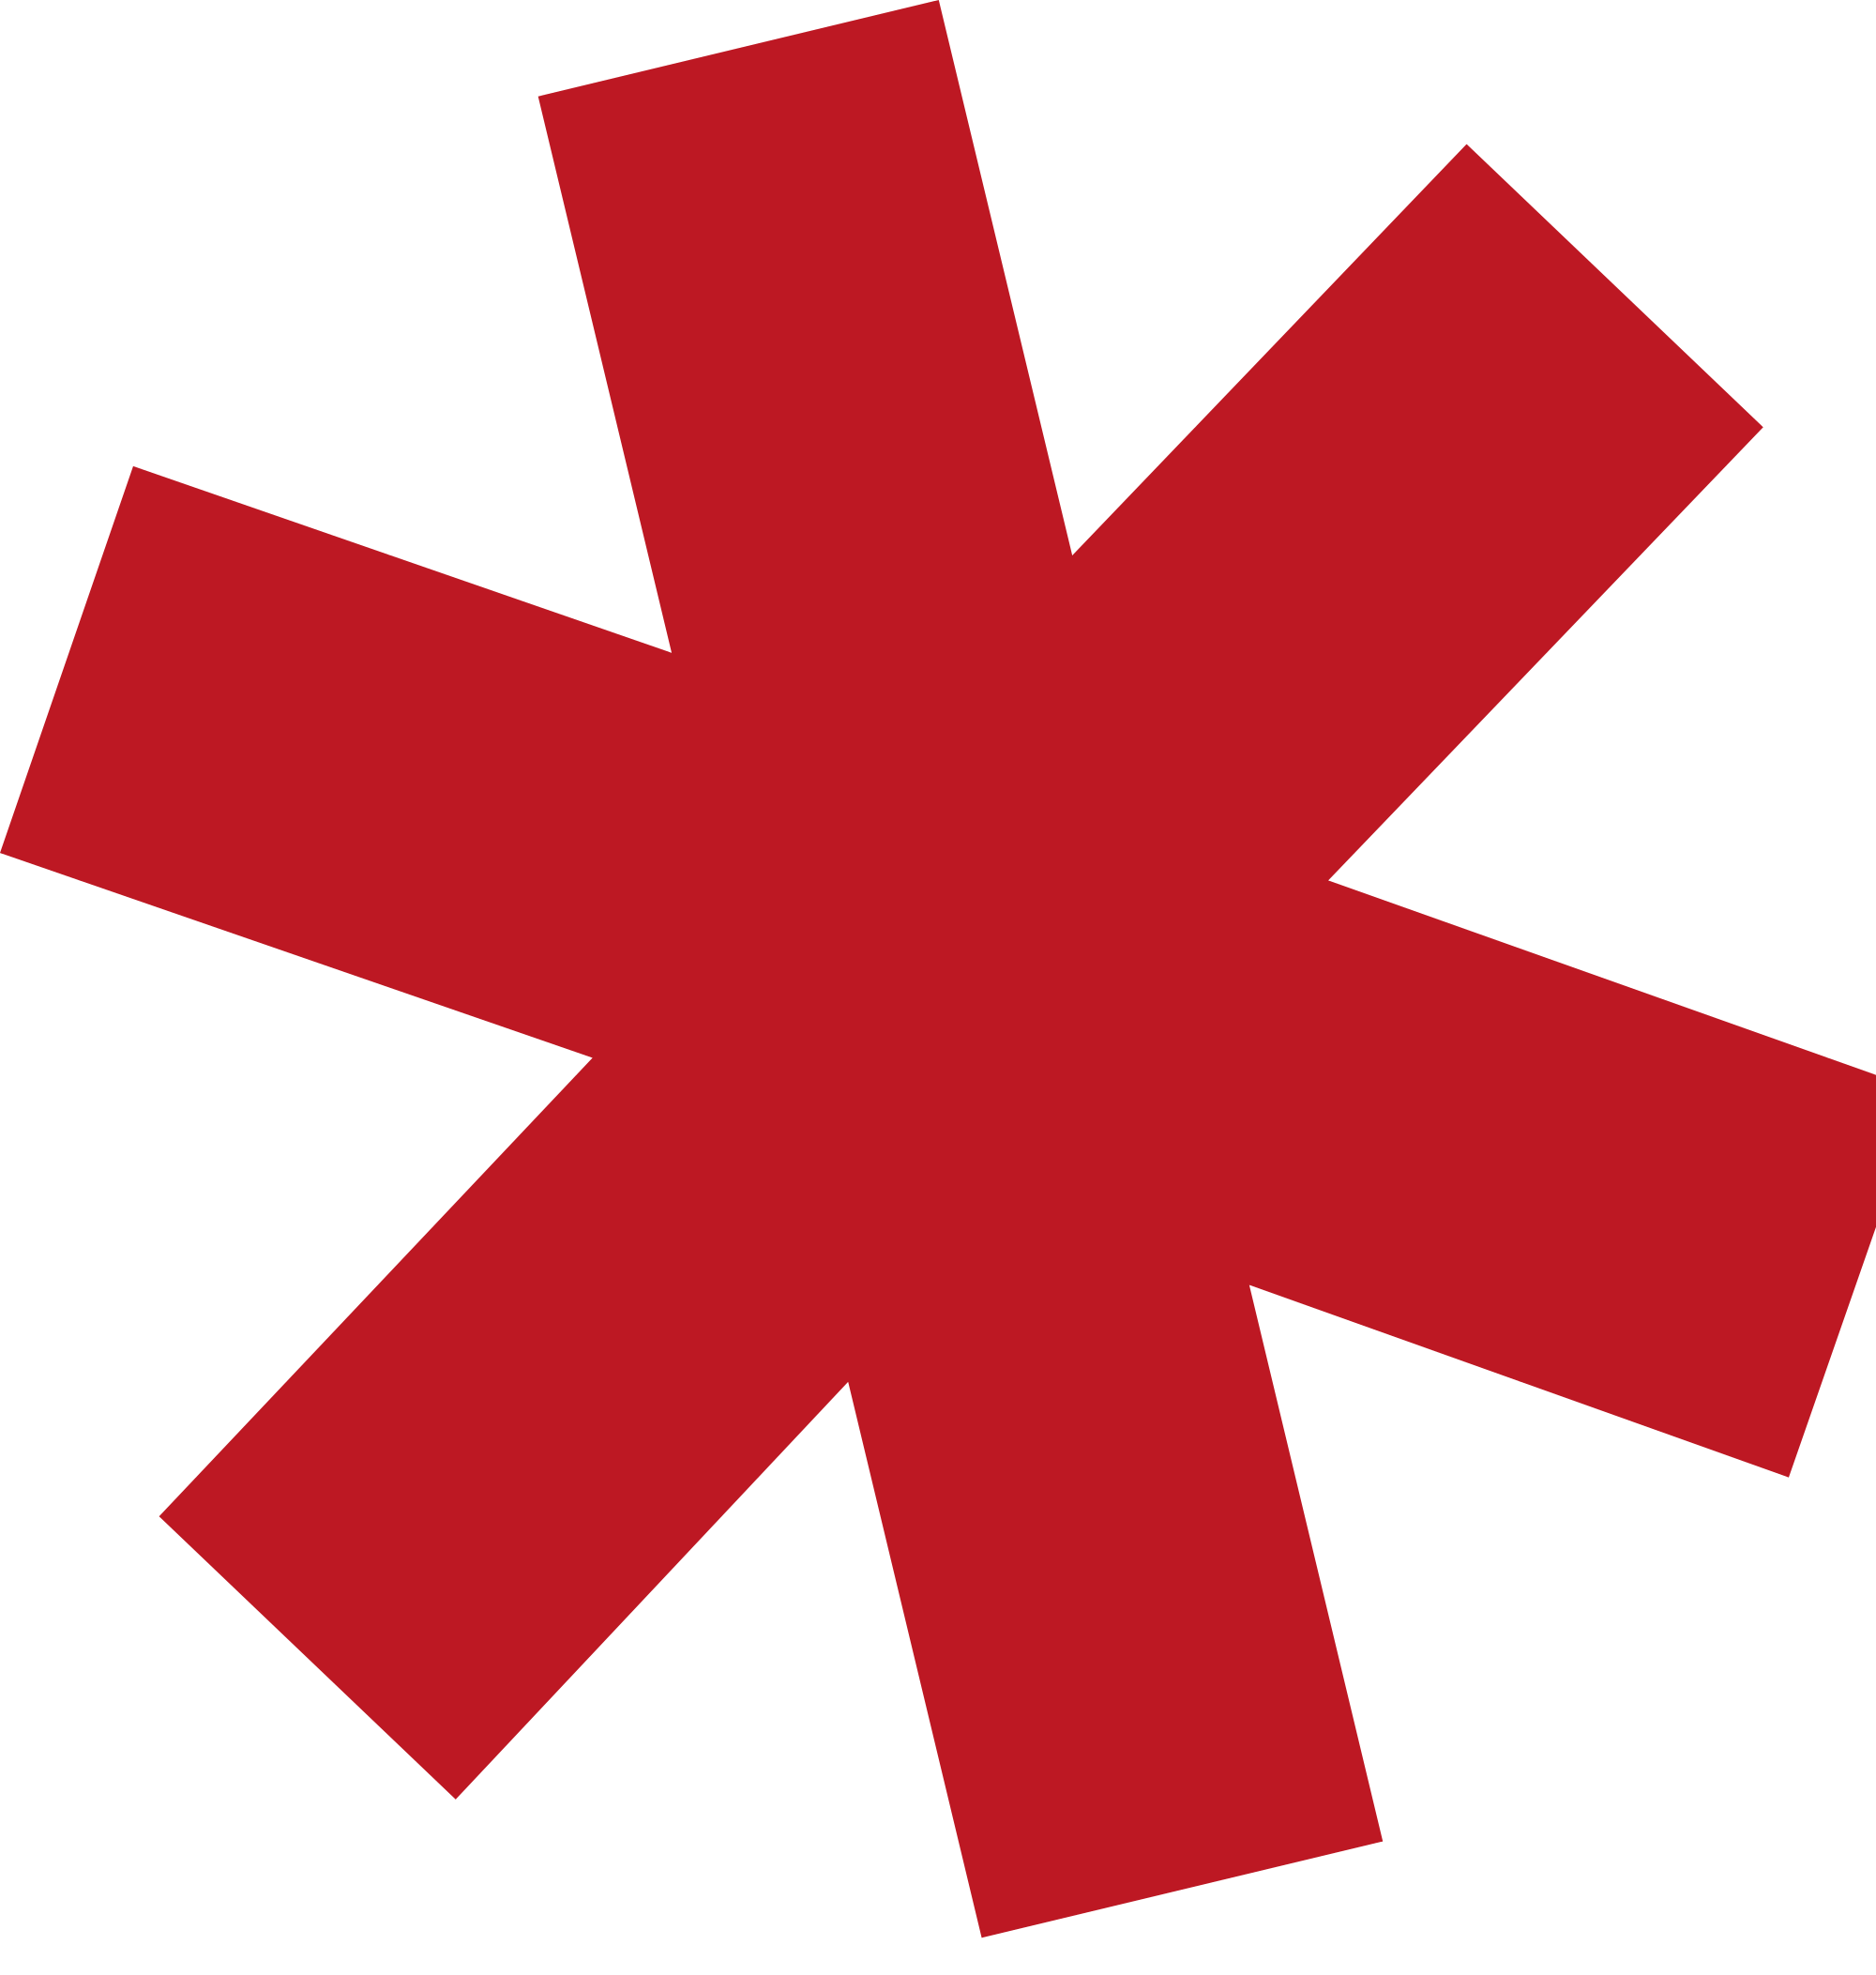 Asterisk signo PNG photo